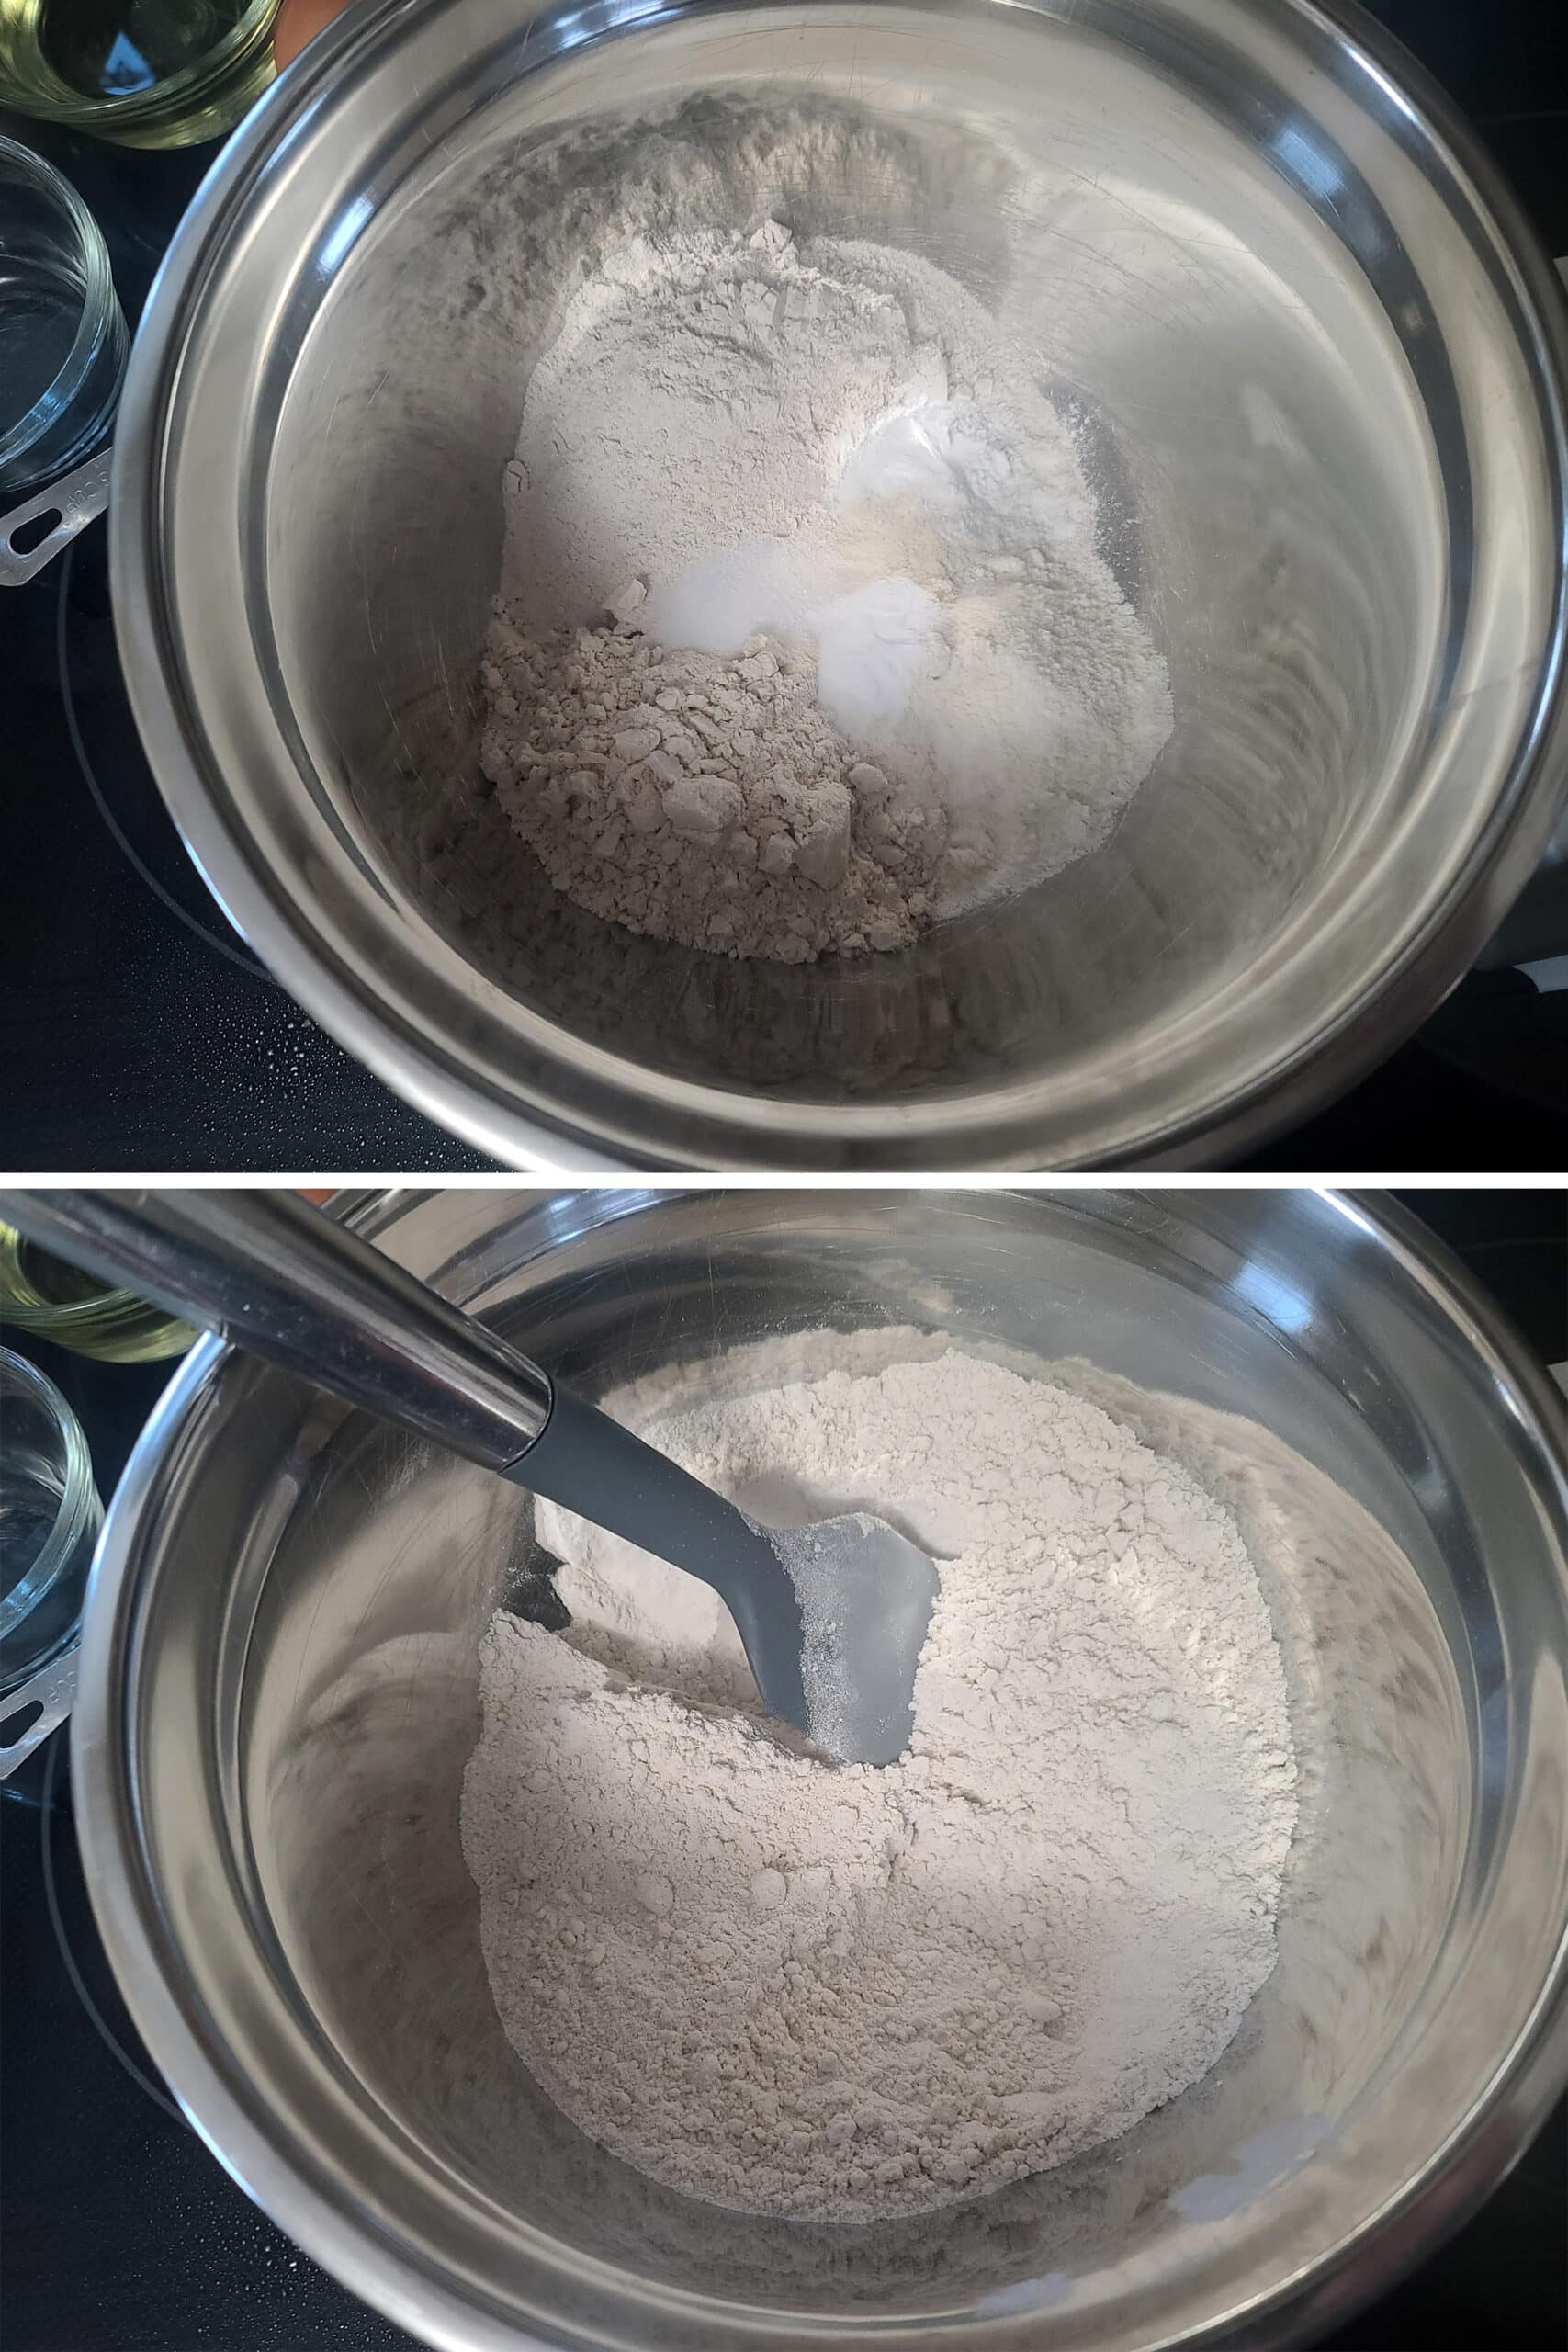 A 2 part image showing the dry ingredients being mixed in a bowl.